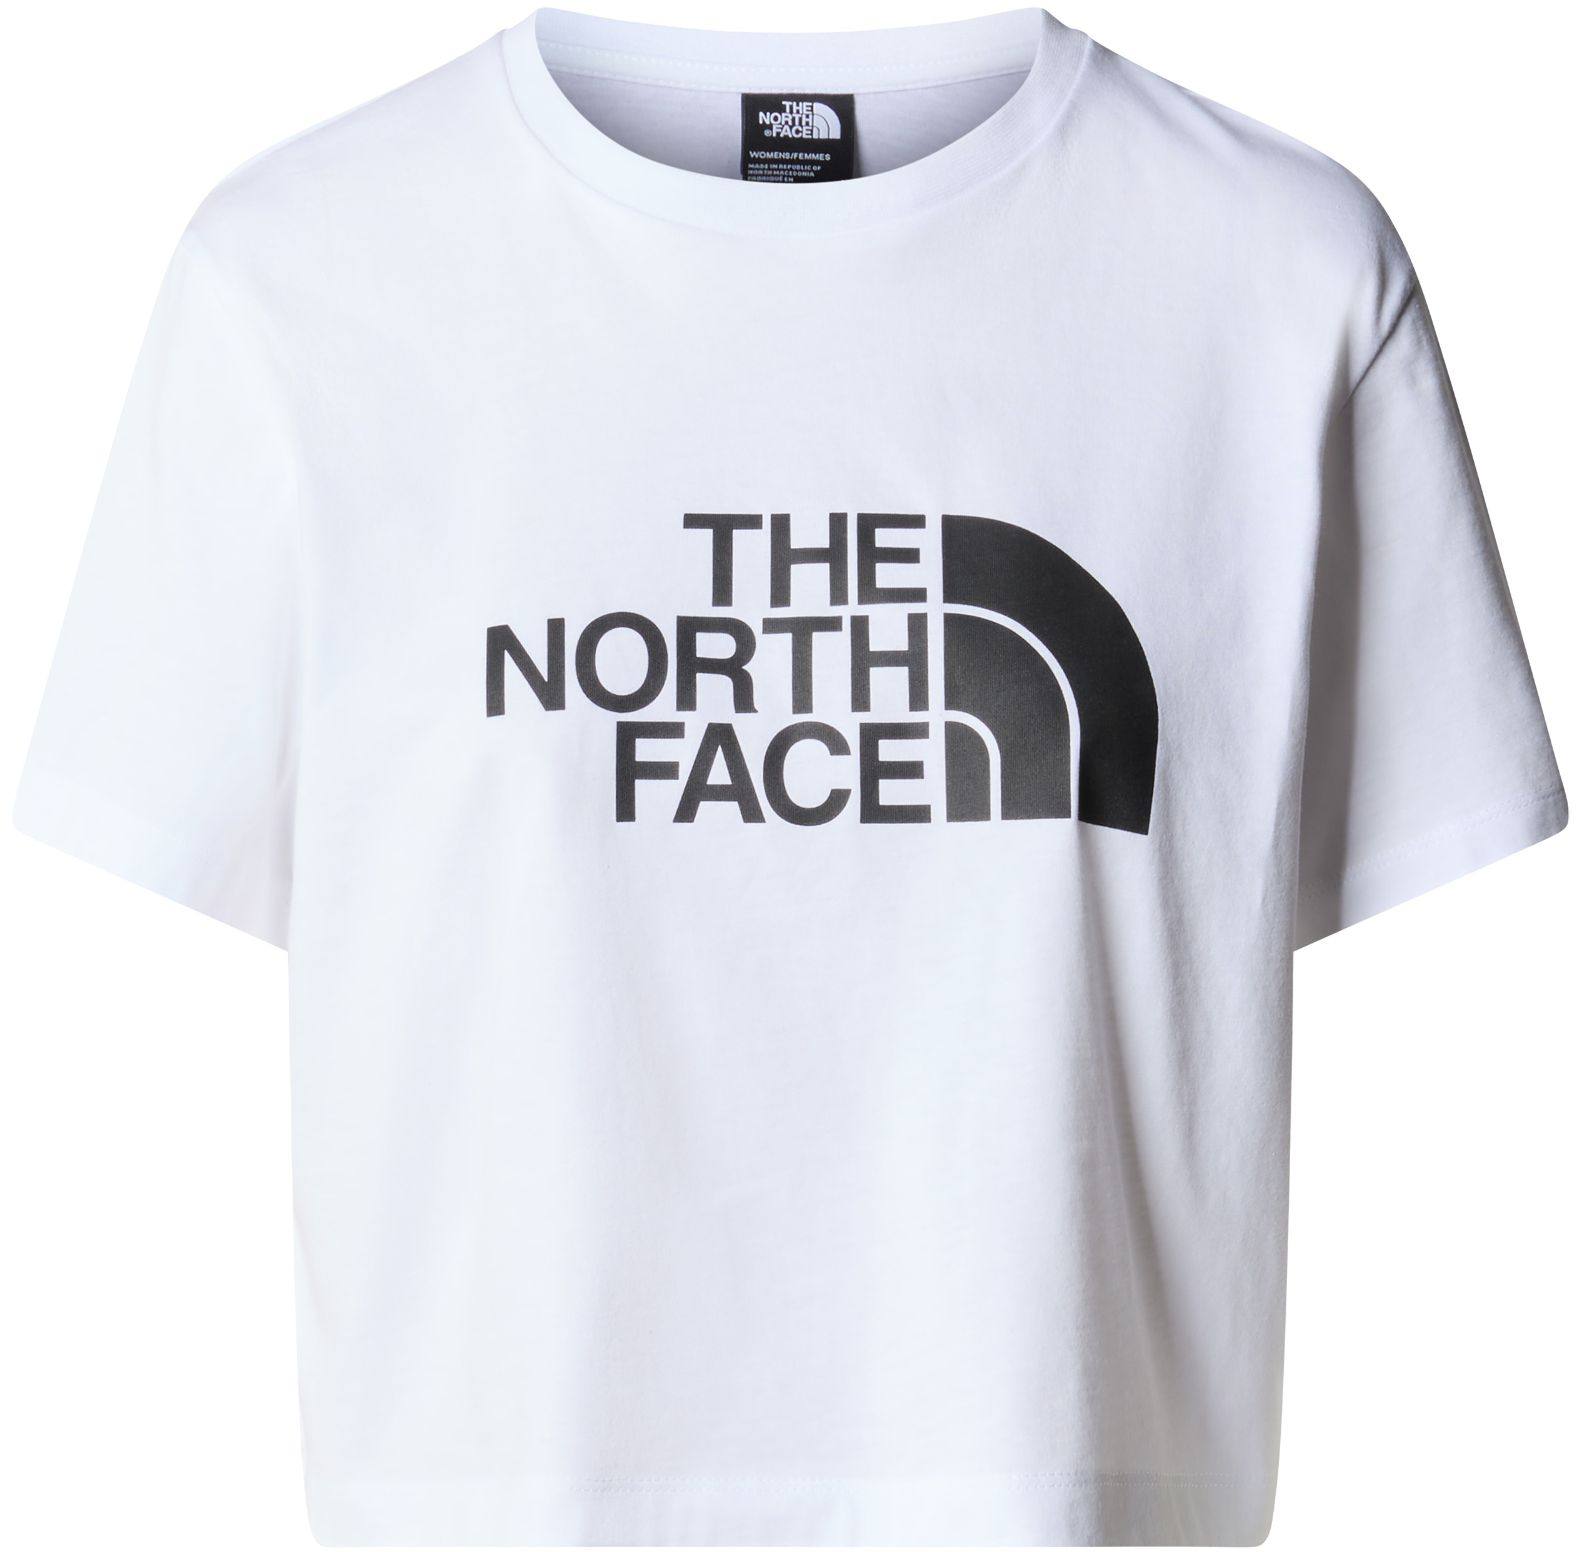 The North Face Women’s Cropped Easy Tee